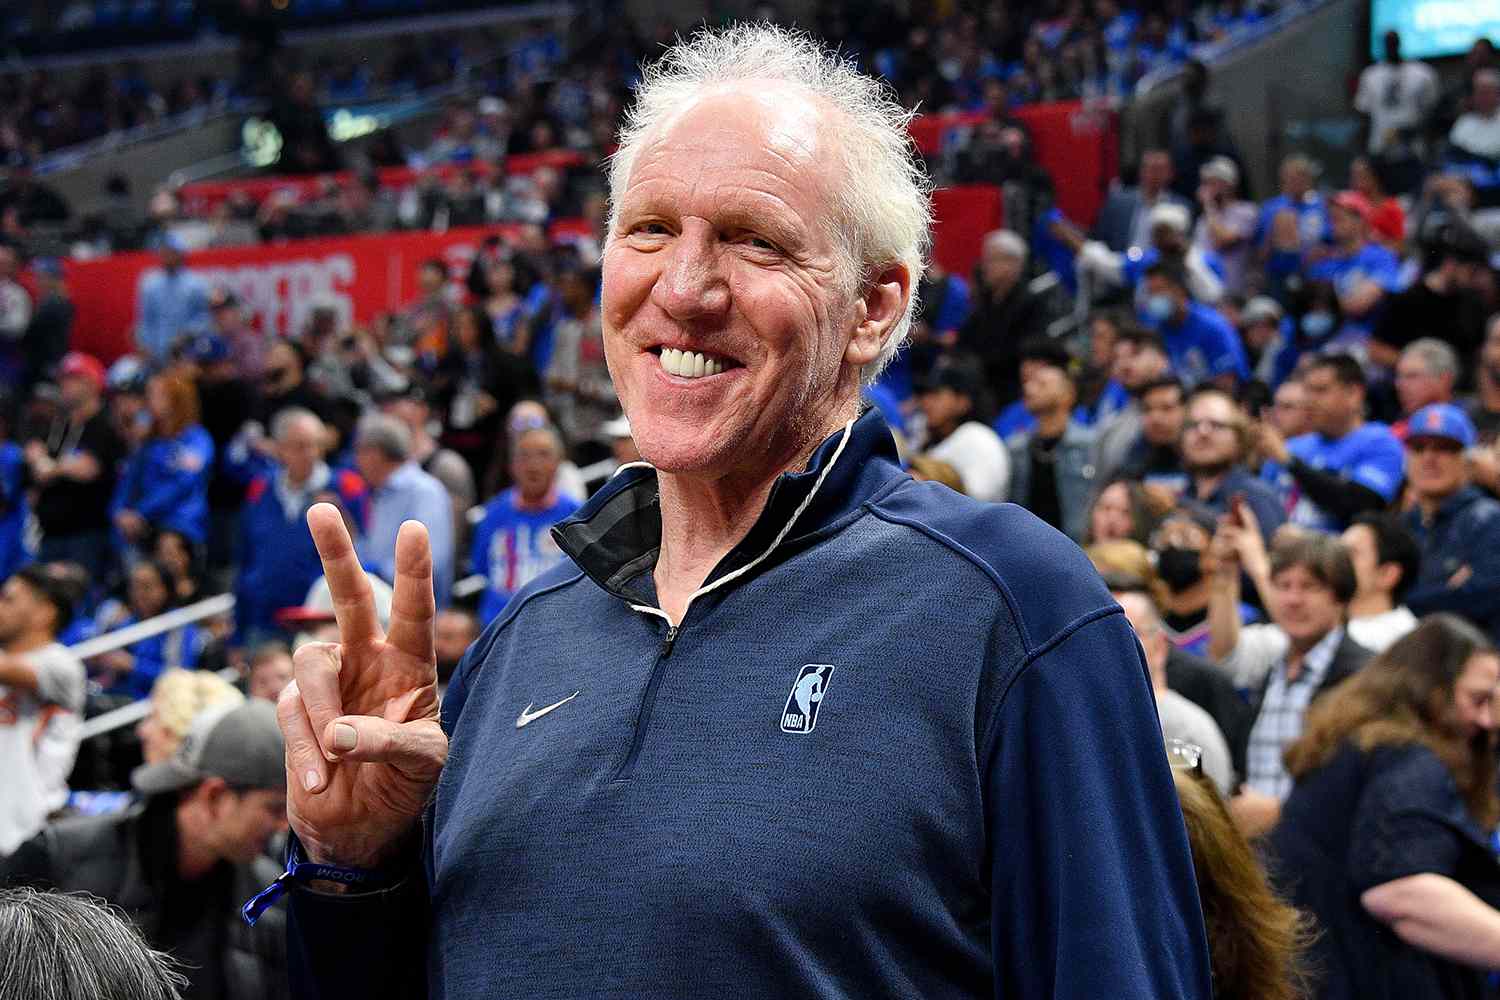 Bill Walton, NBA Hall of Famer and Sportscaster, Dead at 71: 'A Cherished Member of the NBA Family'